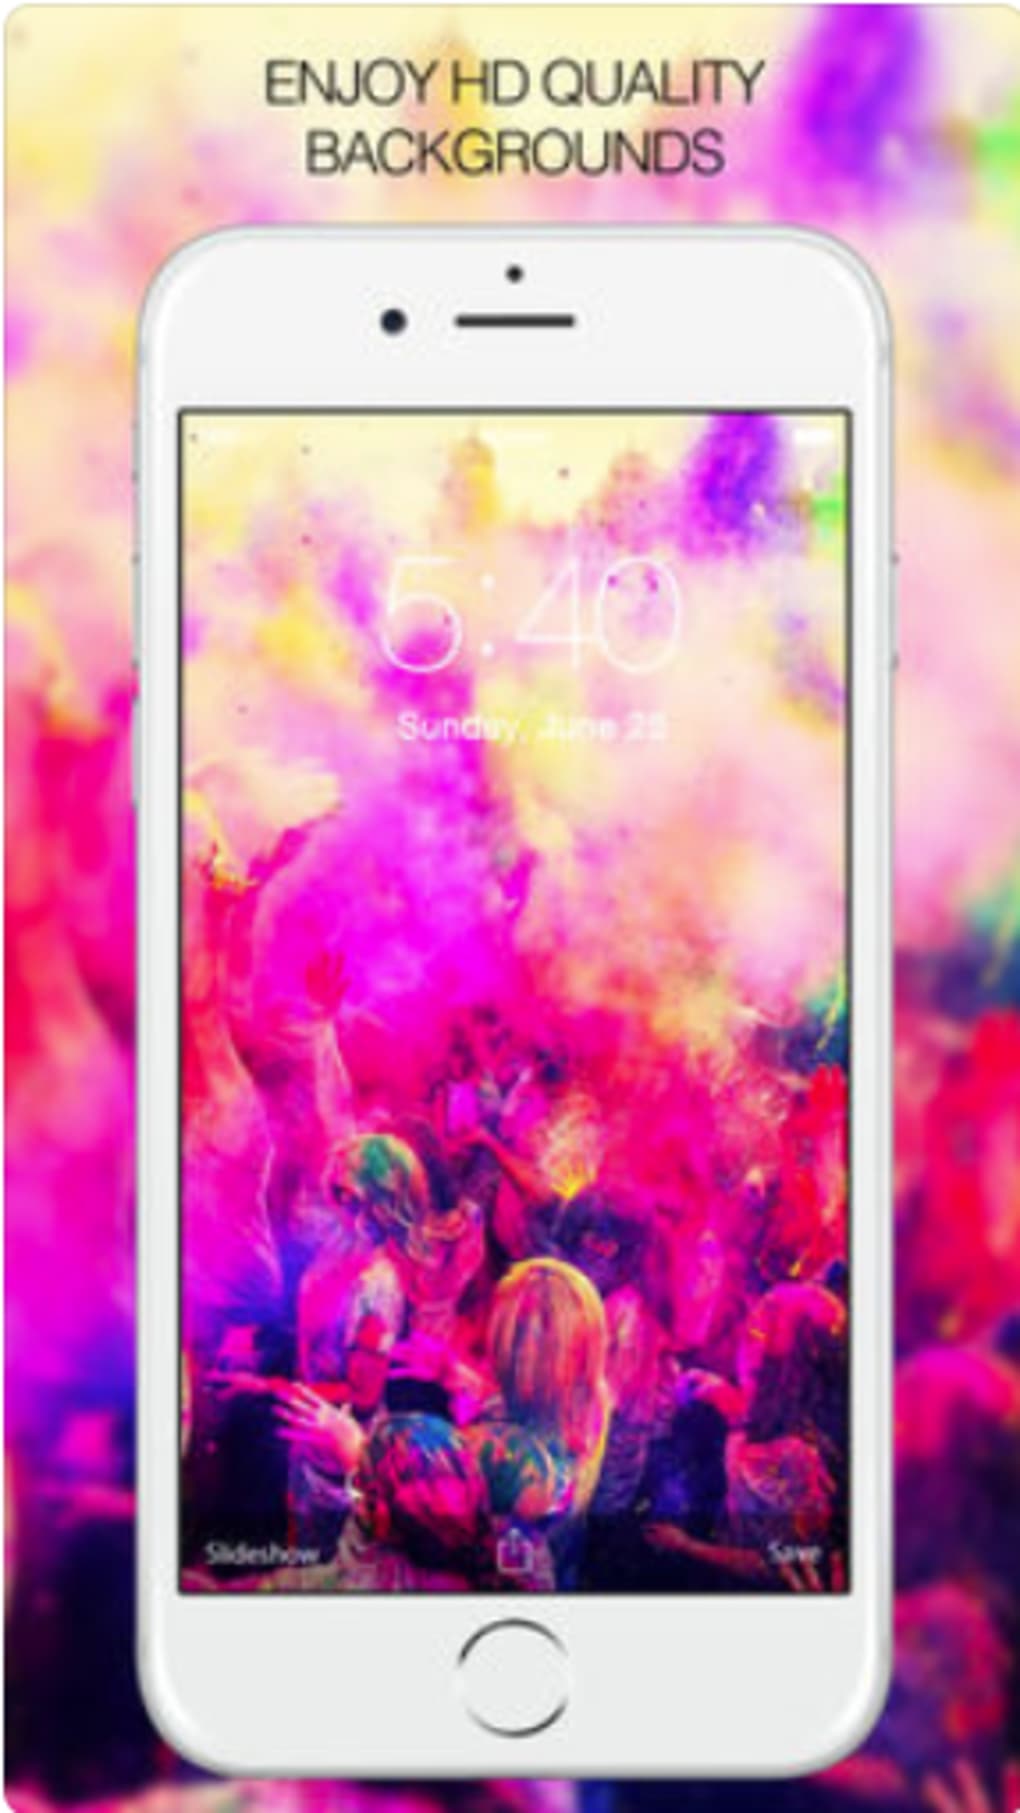 Happy Holi Holi Wallpapers & Holi Images - Holi Png Background Hd , HD Wallpaper & Backgrounds